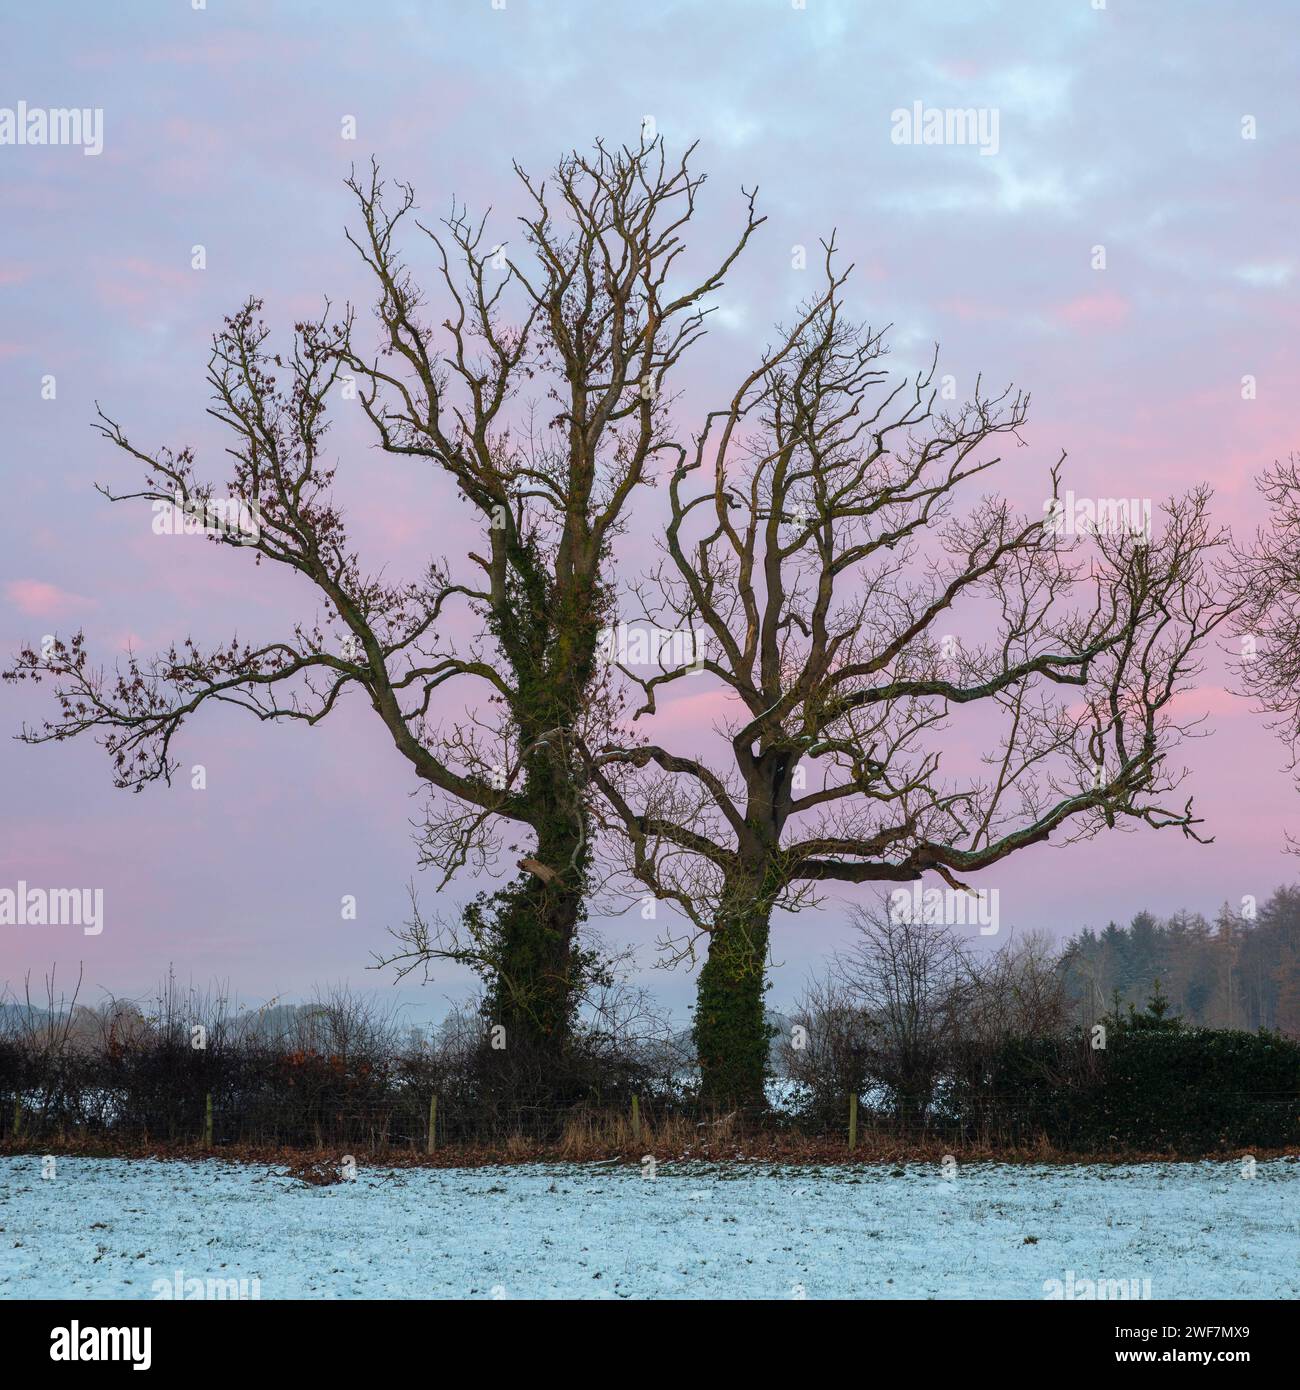 Winter scene at sunset with pink clouds and snow. County Durham, England, UK. Stock Photo